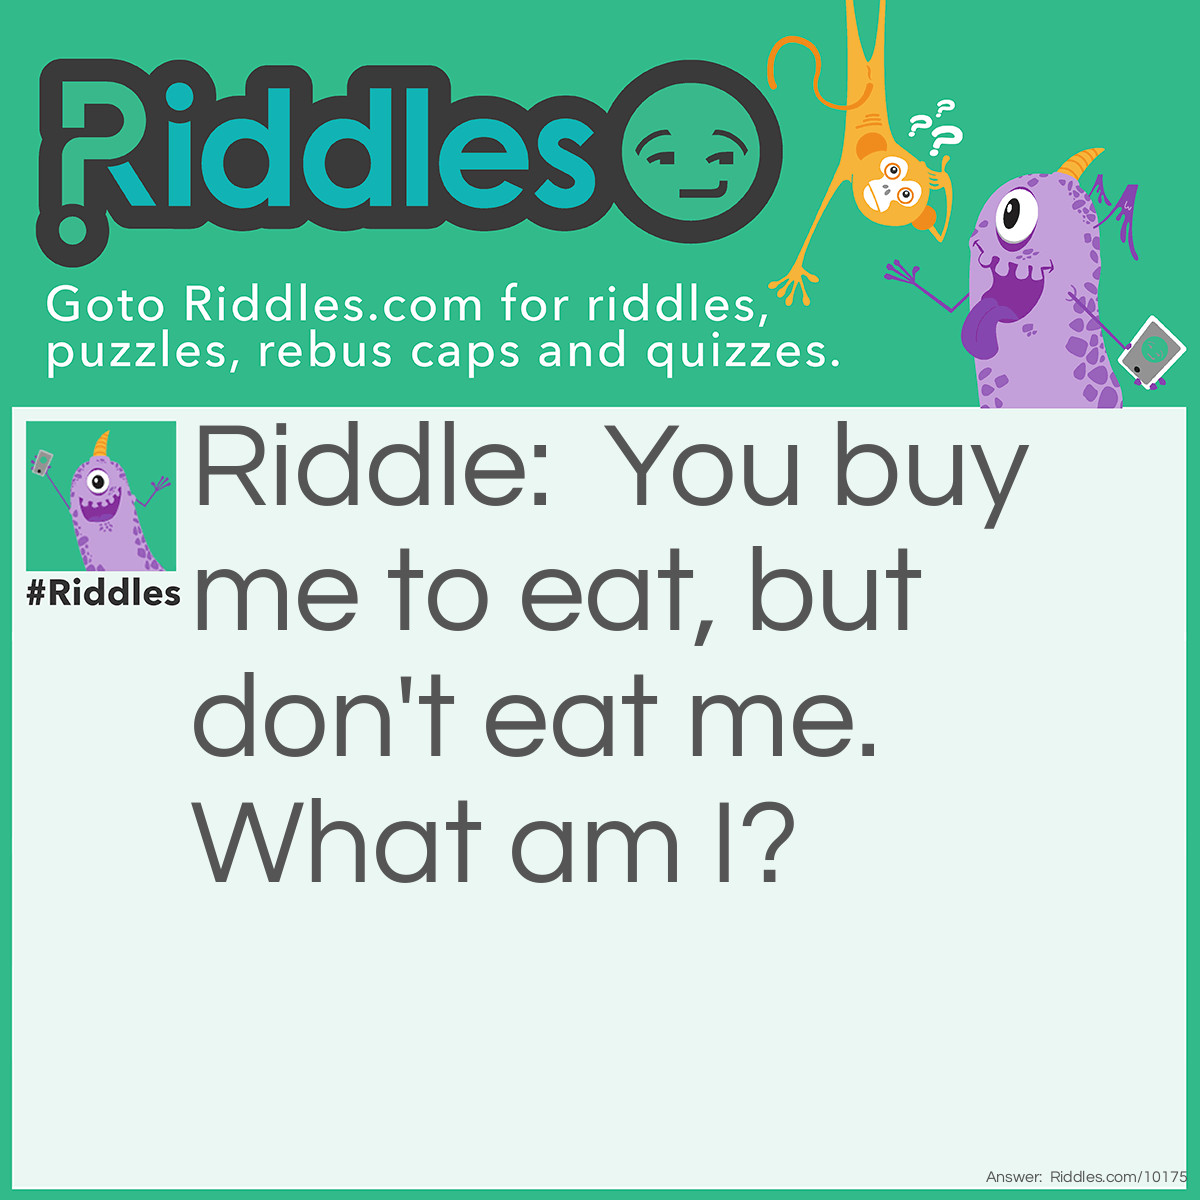 Riddle: You buy me to eat, but don't eat me. What am I? Answer: Cutlery (Forks, spoons etc).